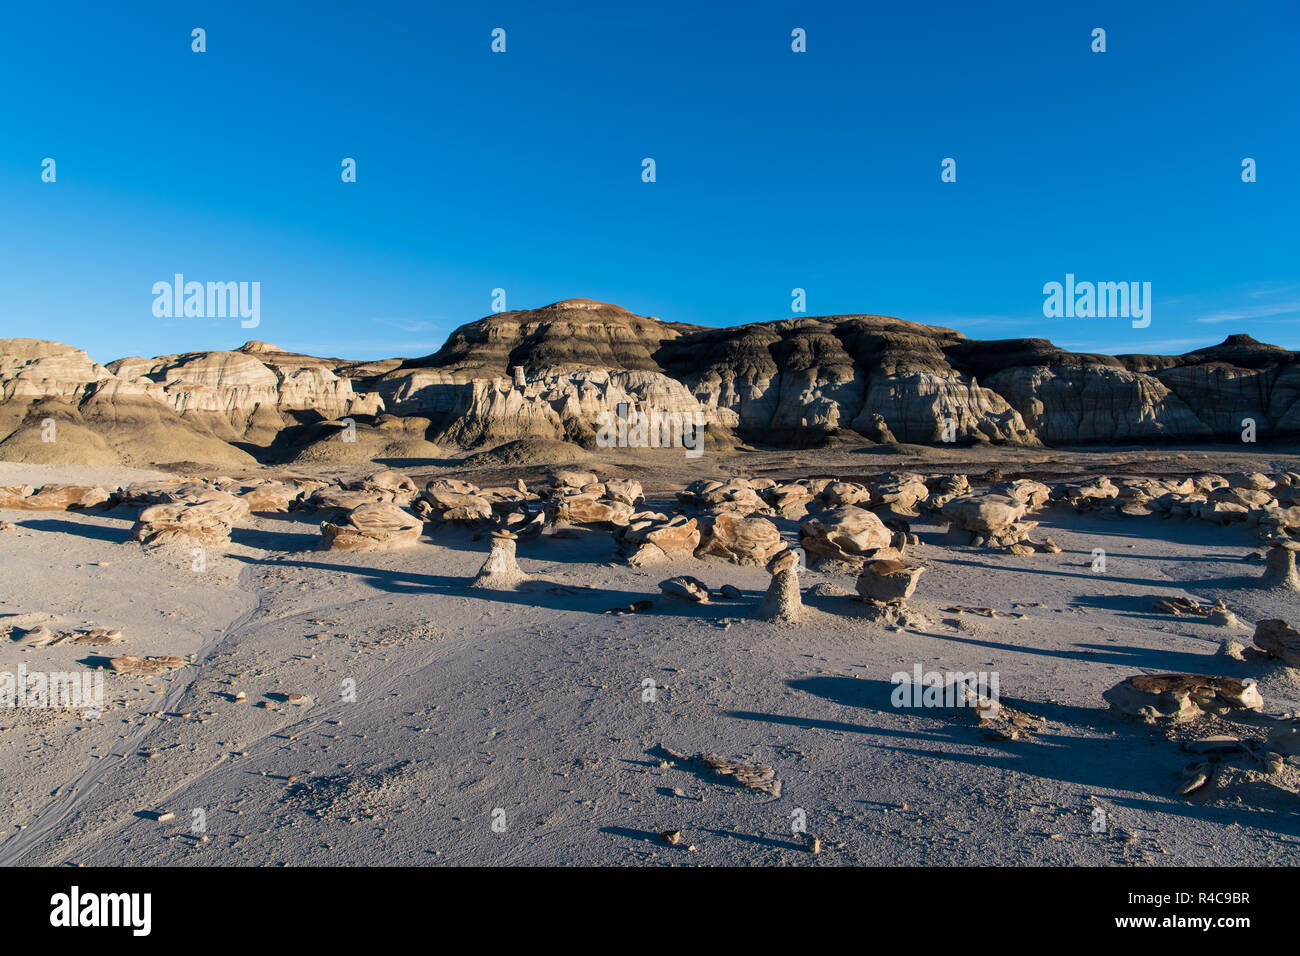 Late afternoon sunlight on the 'Cracked Eggs' rock field and rock formations in the Bisti Badlands in New Mexico Stock Photo